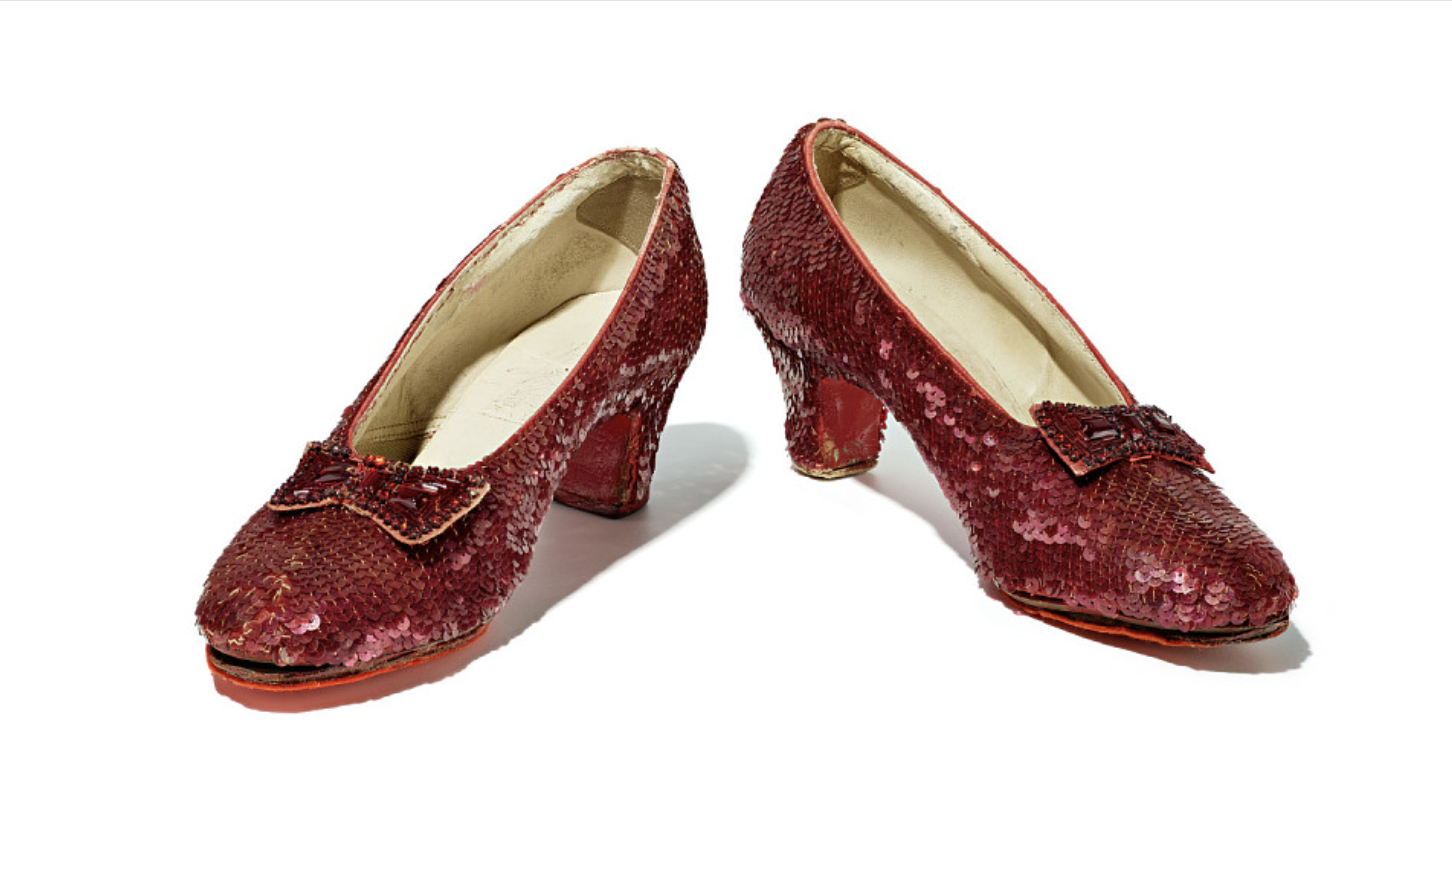 Judy Garland’s ruby slippers